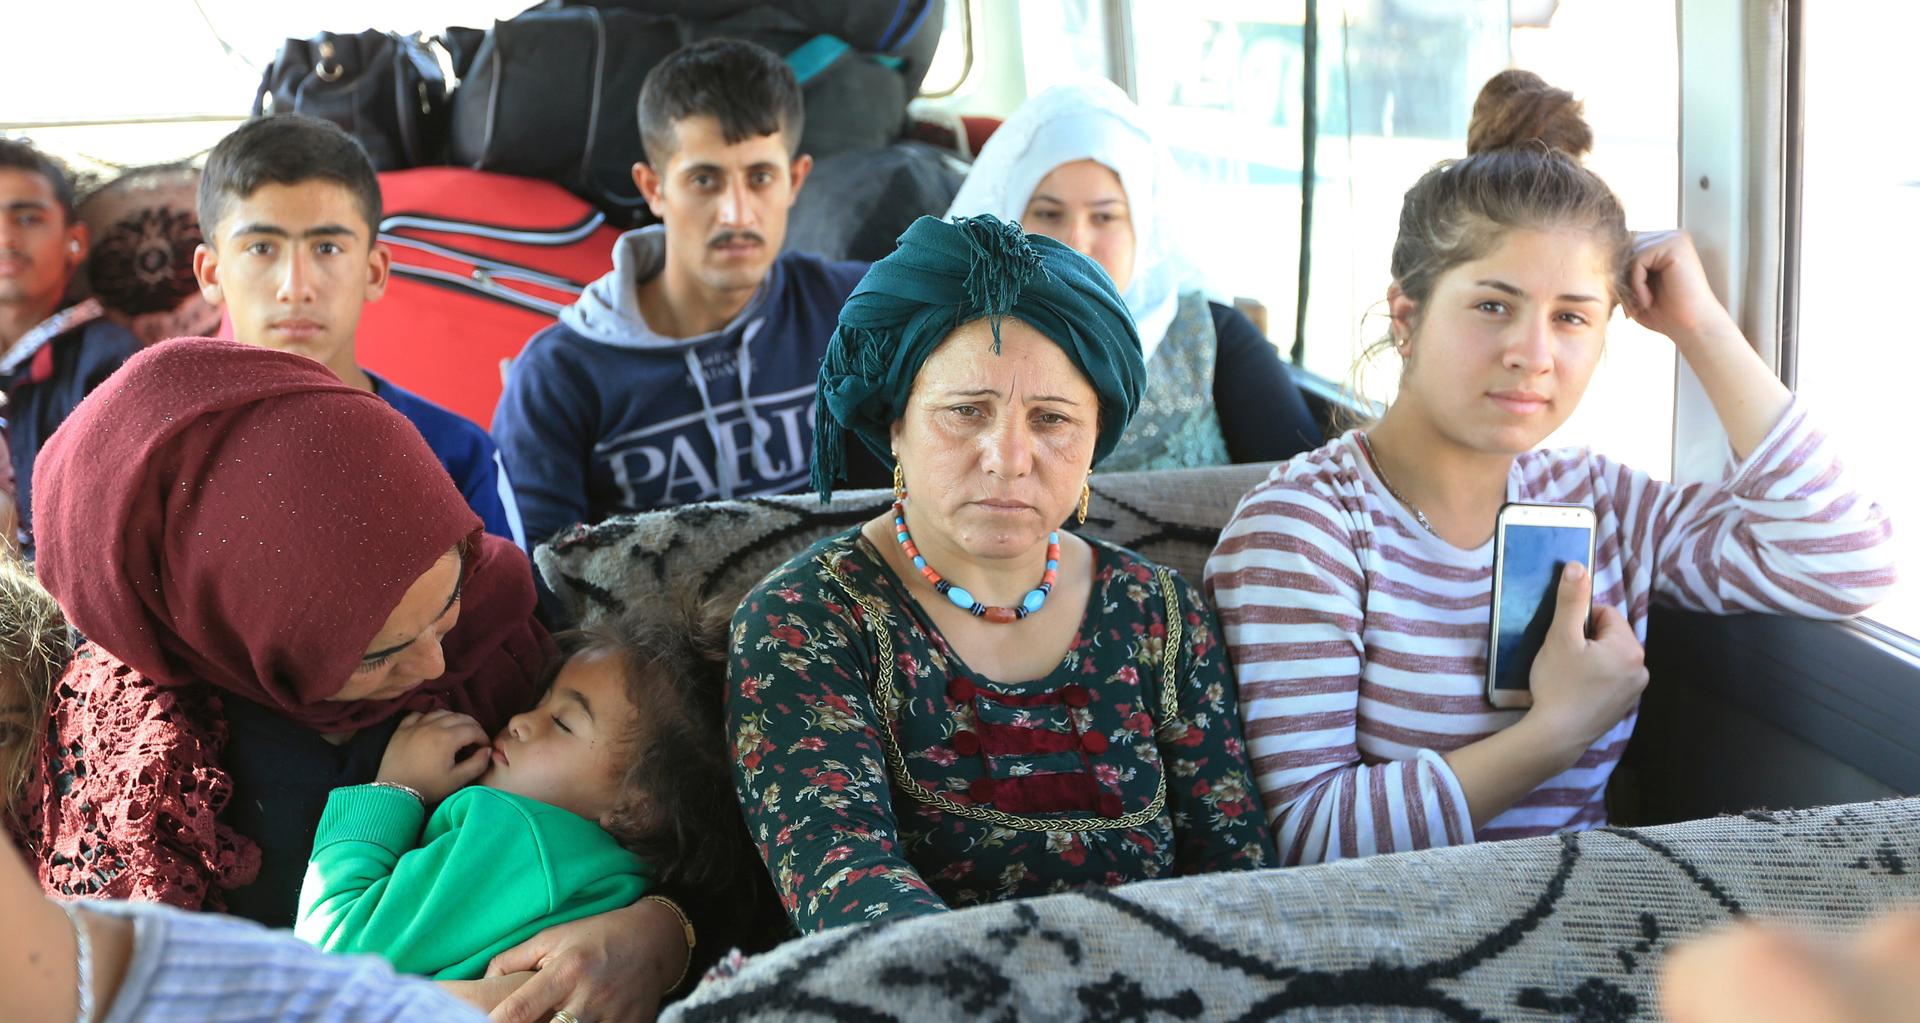 Syrian displaced families who fled violence after the Turkish offensive against Syria, sit in a bus on their way to camps on the outskirts of Dohuk, Iraq, on October 16, 2019.